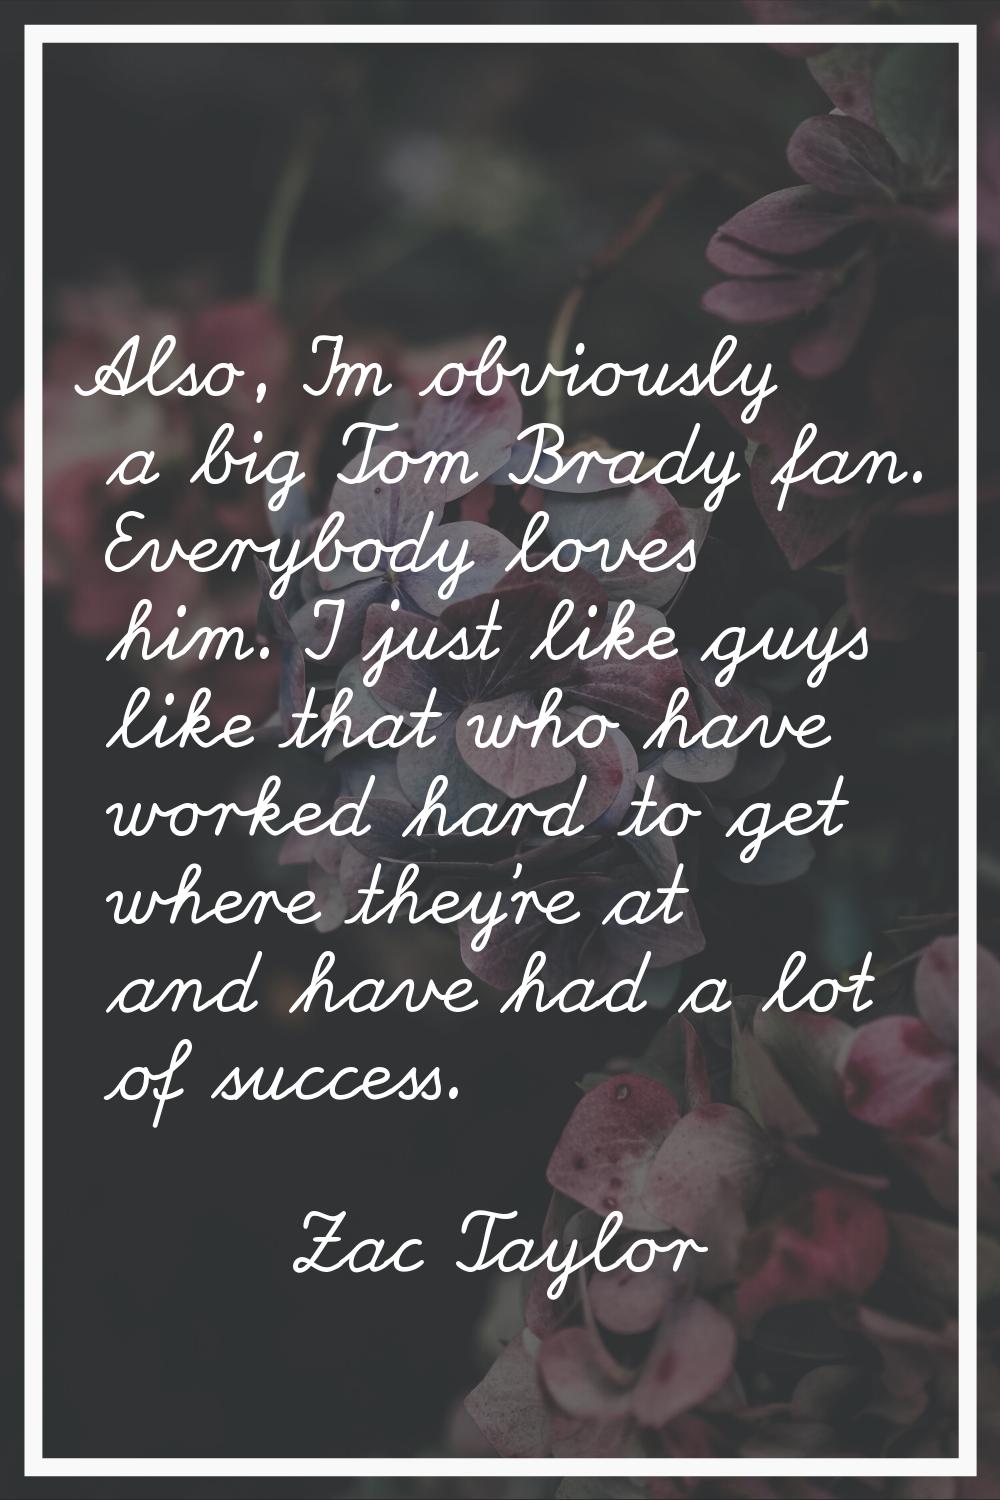 Also, I'm obviously a big Tom Brady fan. Everybody loves him. I just like guys like that who have w